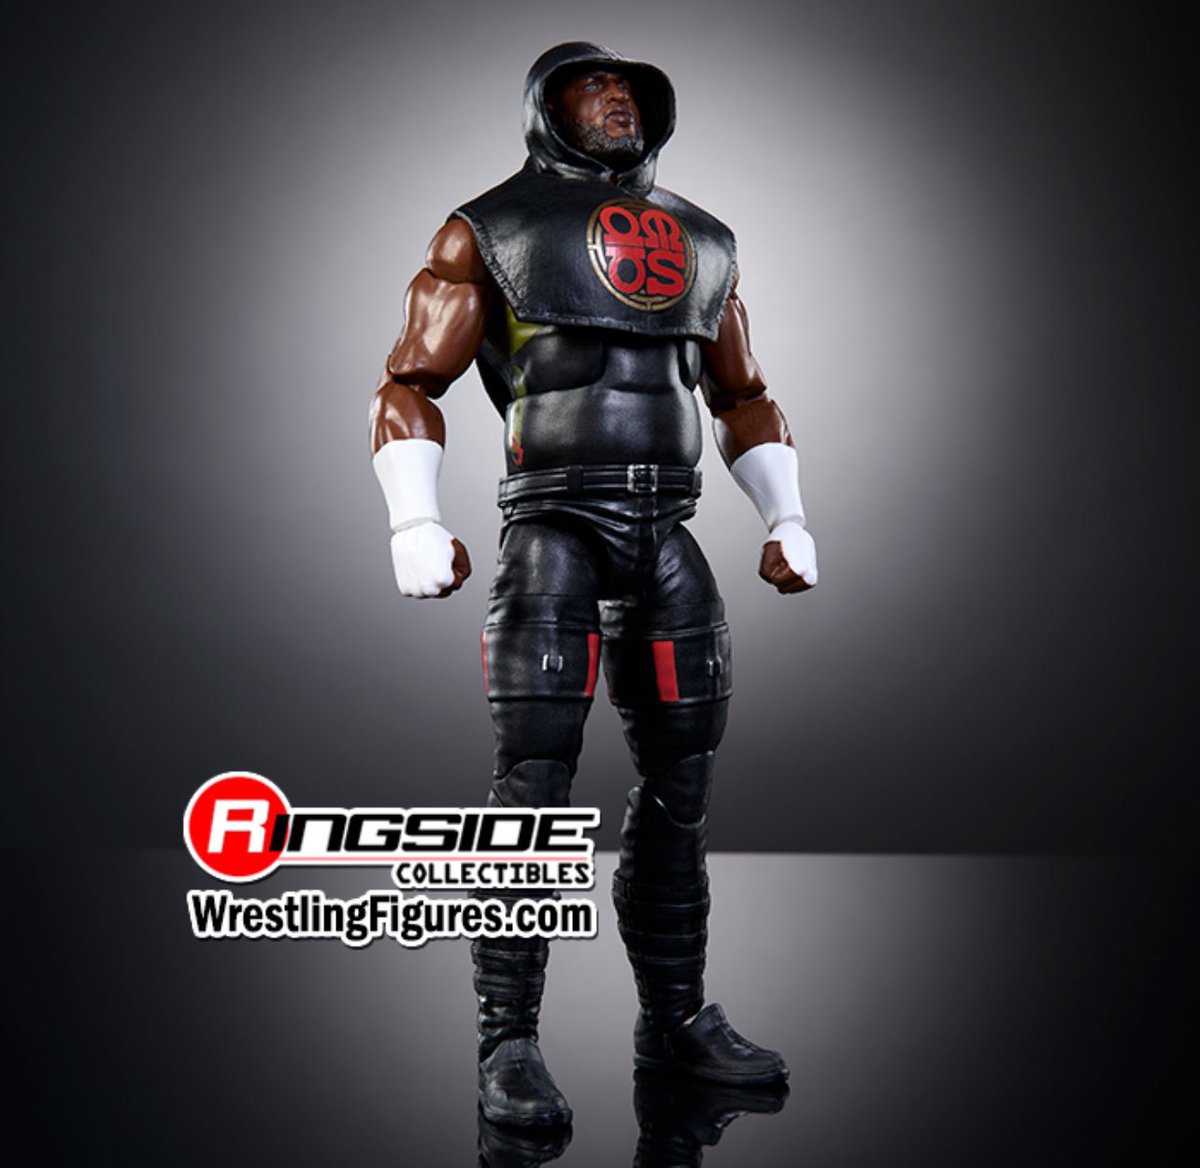 Omosapiens open your wallets & rise!

ringsidecollectibles.com/wwe-elite-108-…